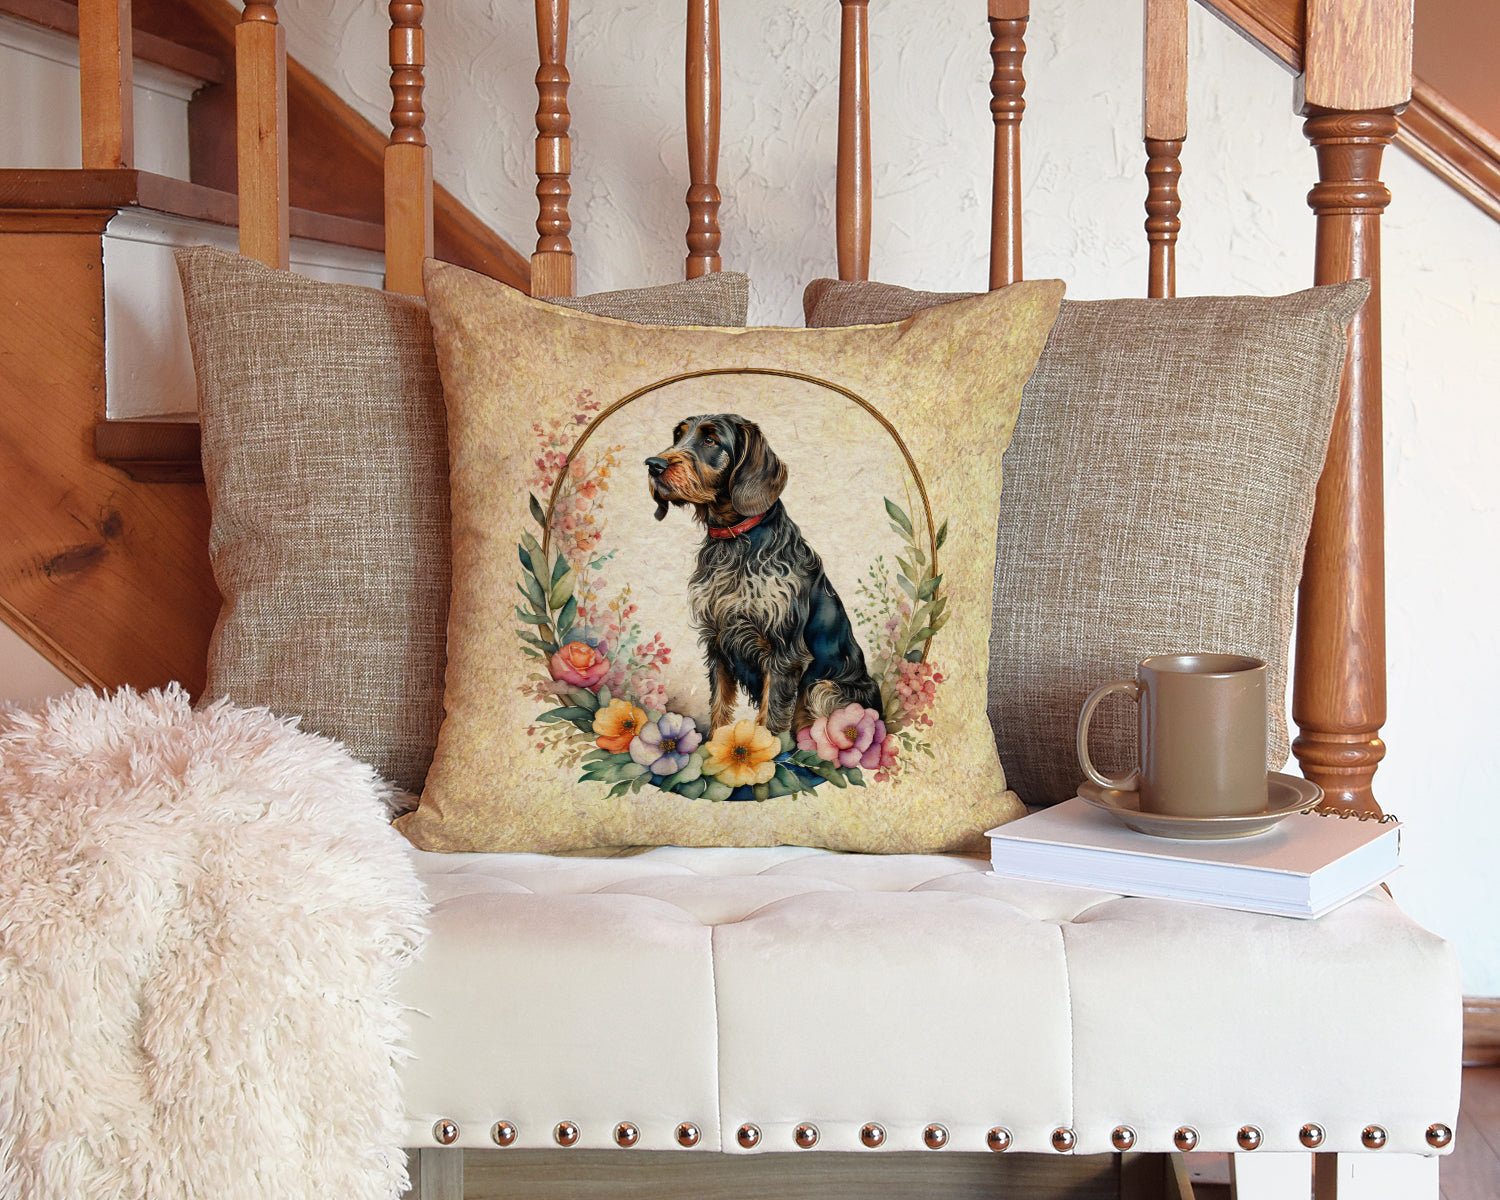 German Wirehaired Pointer and Flowers Fabric Decorative Pillow